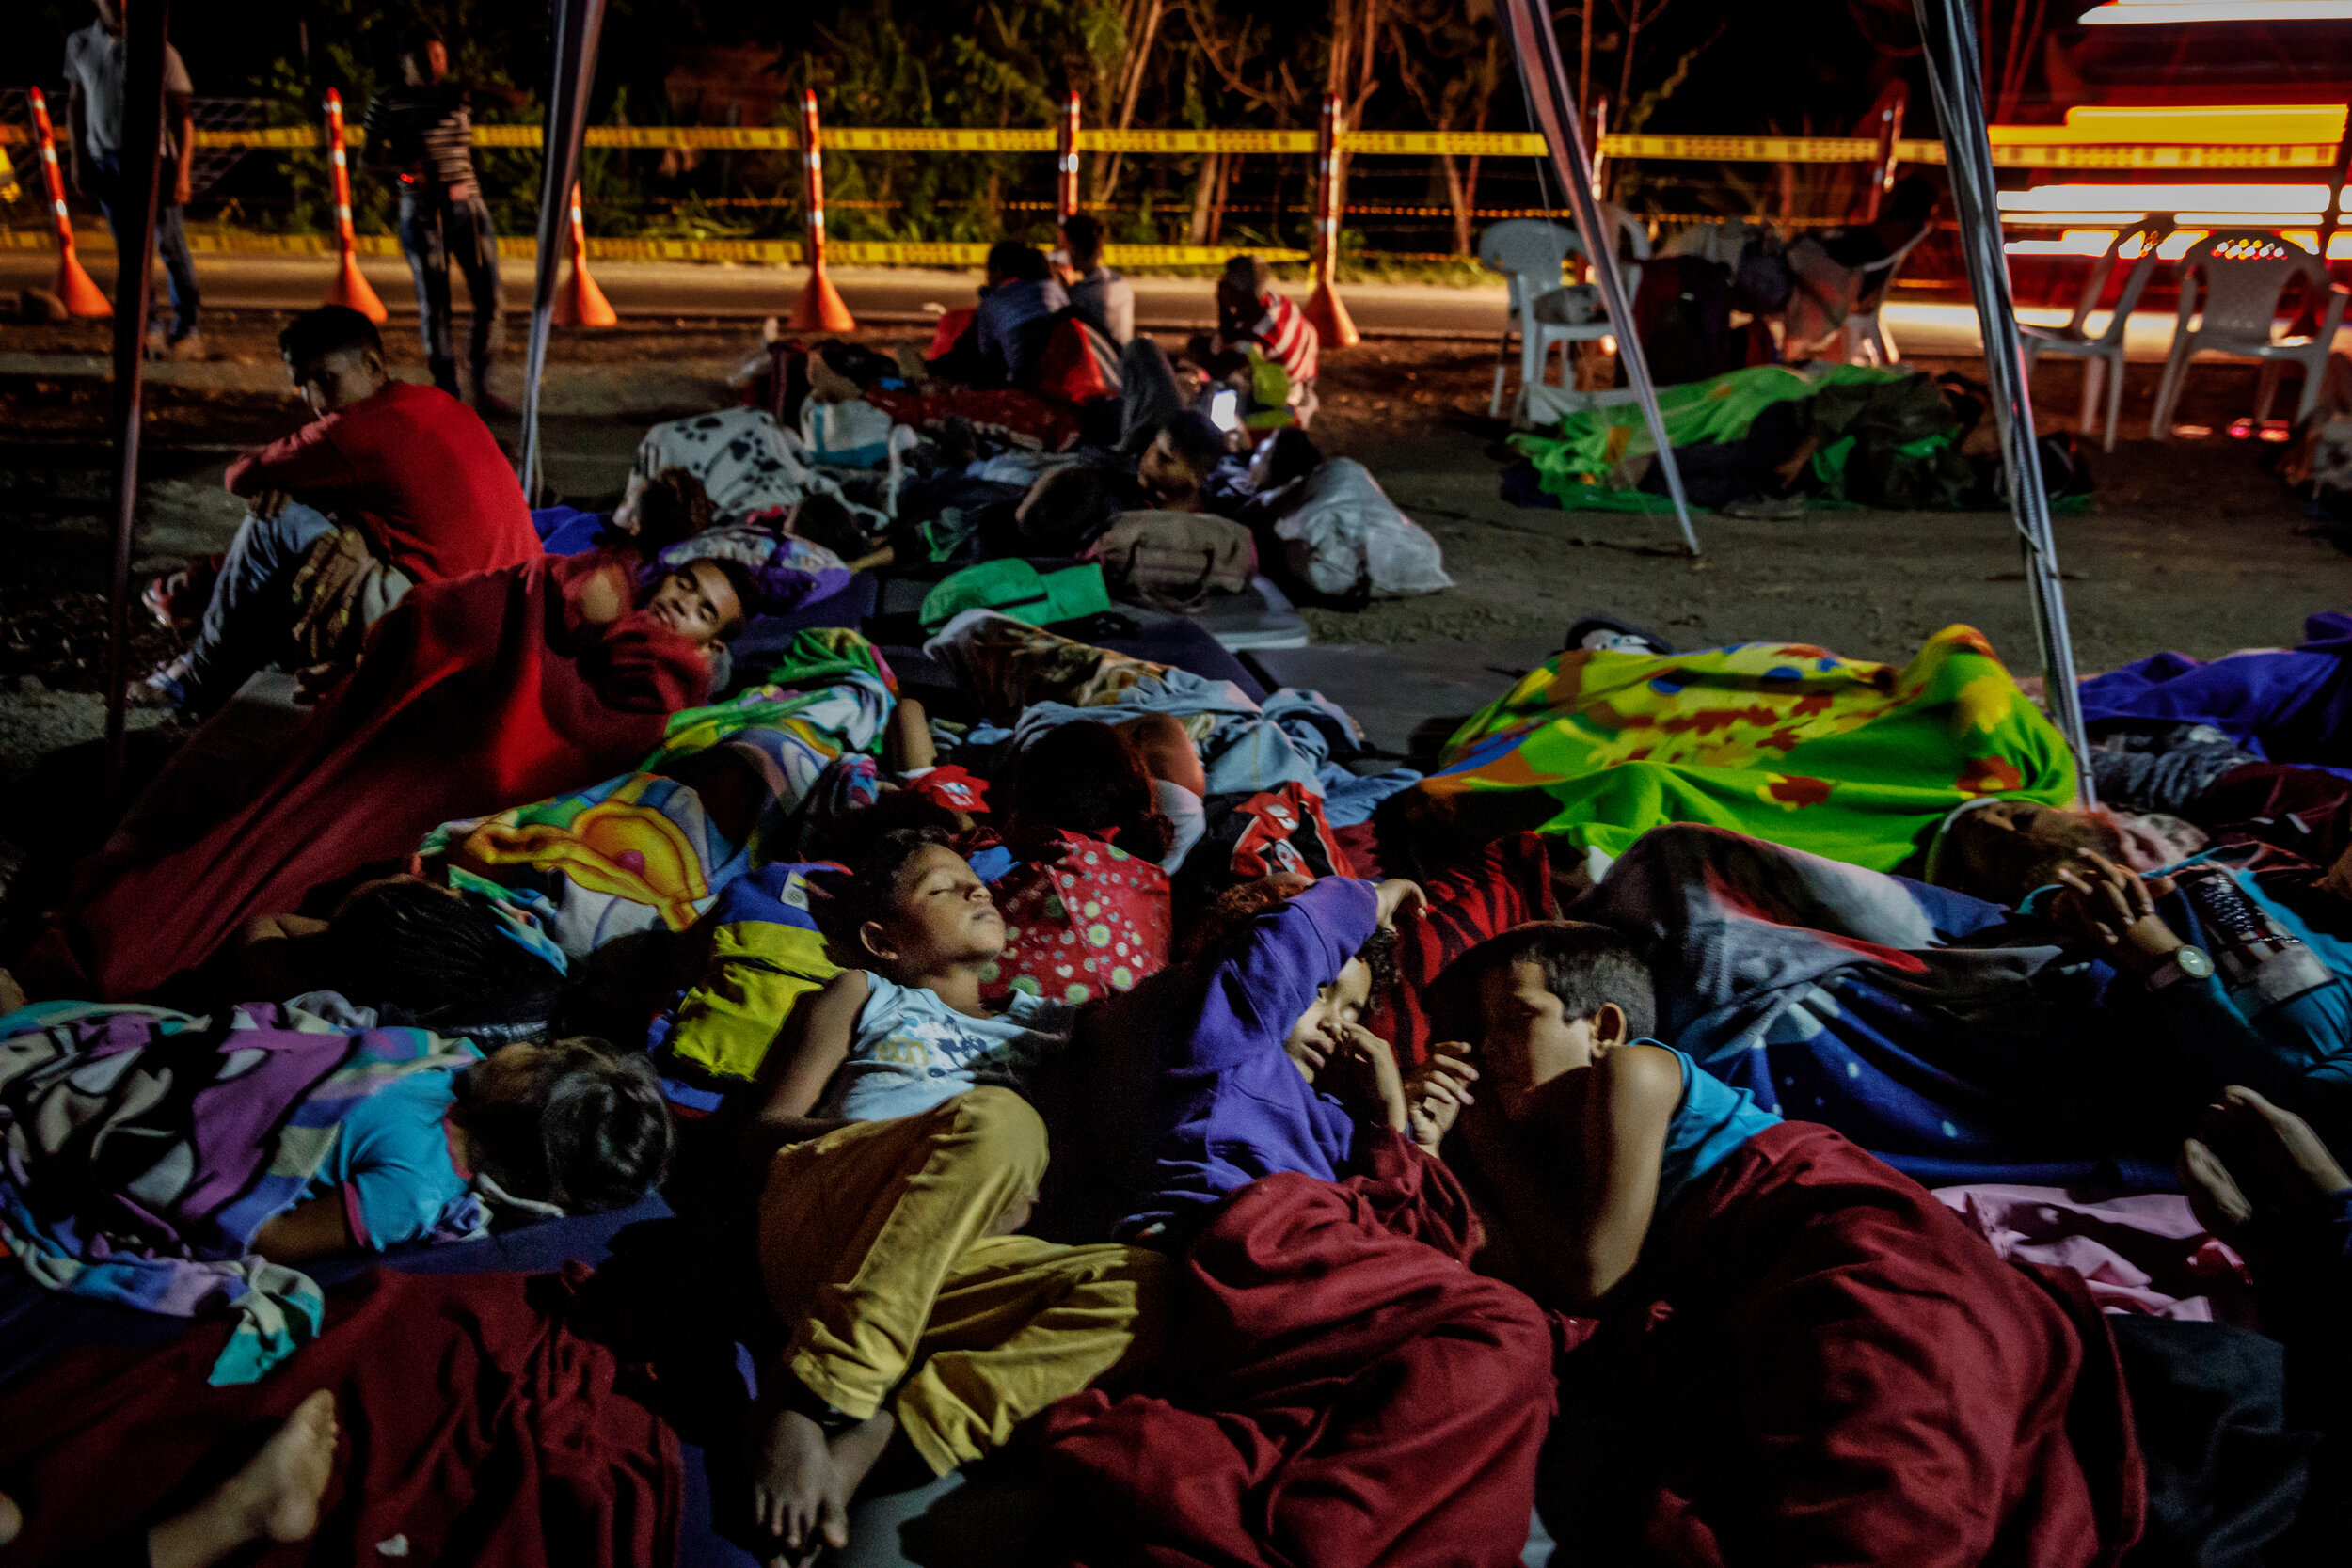  Venezuelan children sleep on the ground after their families arrive on foot at the campground in Bochalema, Colombia. All around them, other travelers arranged thin blankets on the uneven dirt amid chatter of backaches and blisters and the cold. The